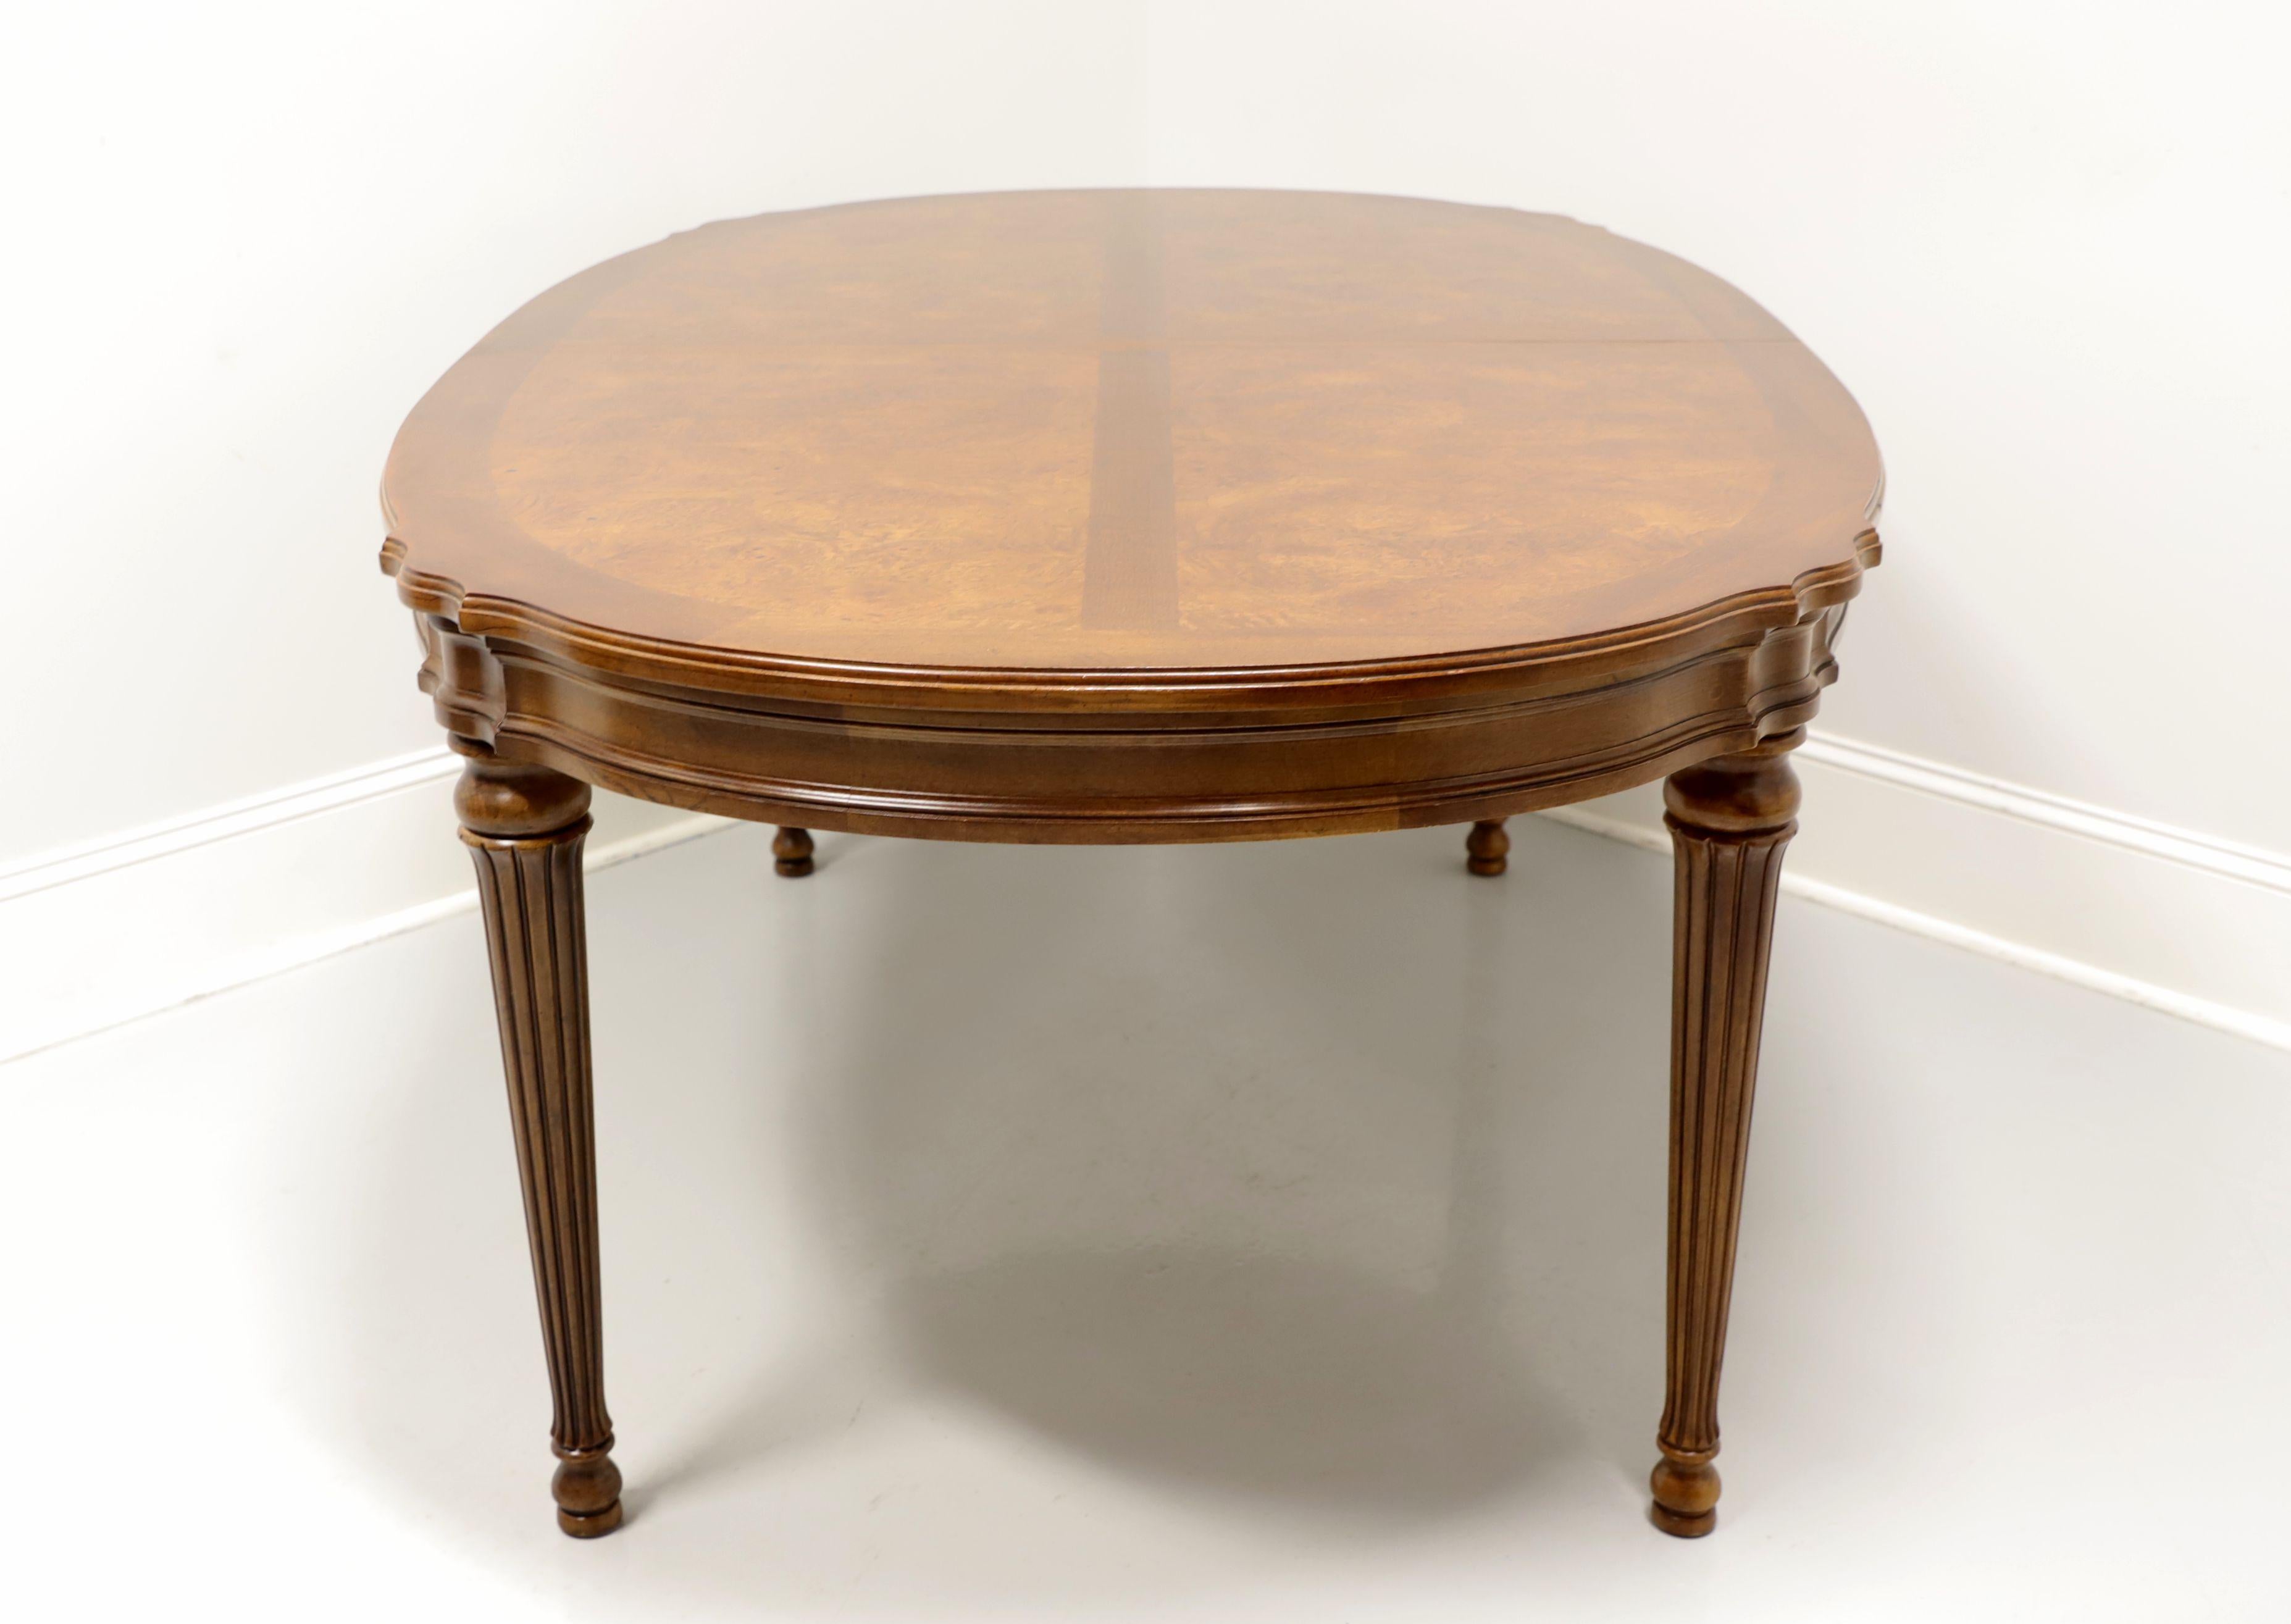 An oval dining table in the French Provincial style by White Furniture Co., of Mebane, North Carolina, USA. Burl Elm with inlaid & banded top, serpentine edge, carved apron, fluted tapered legs and pad feet. Metal expansion sliders. Includes two